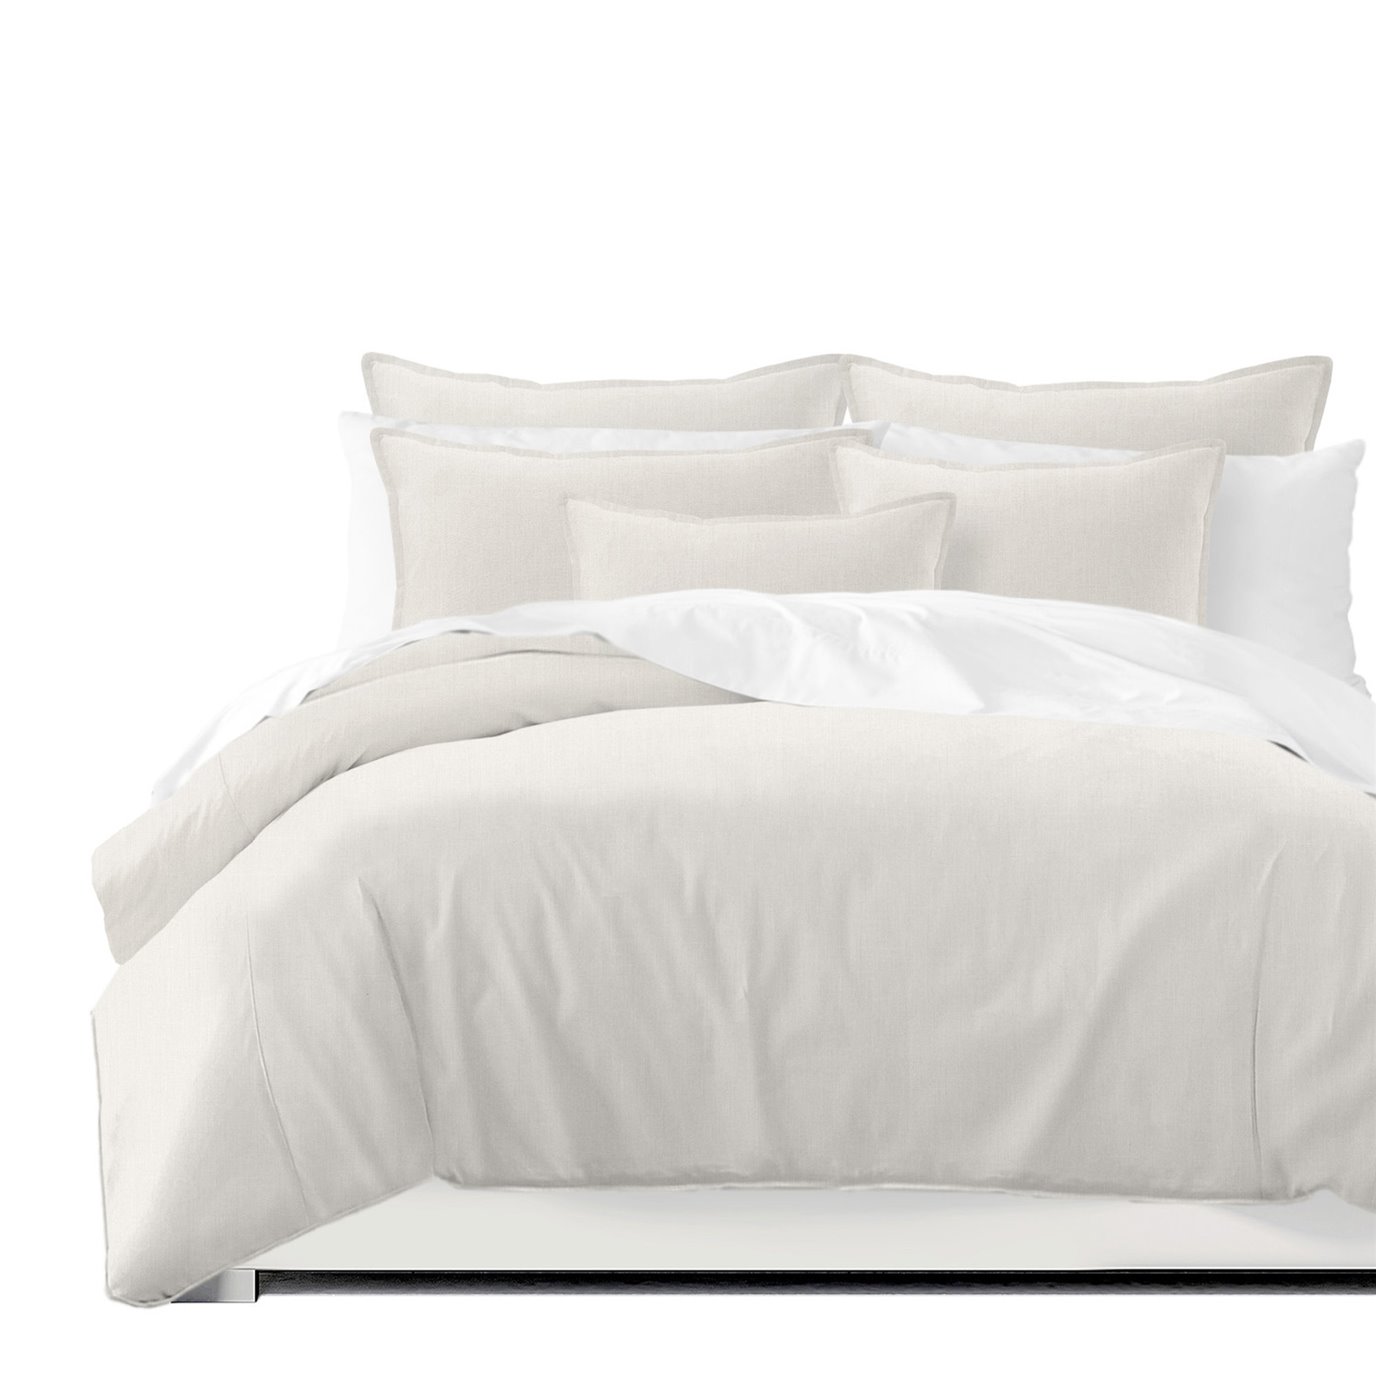 Sutton Pearl Comforter and Pillow Sham(s) Set - Size Full